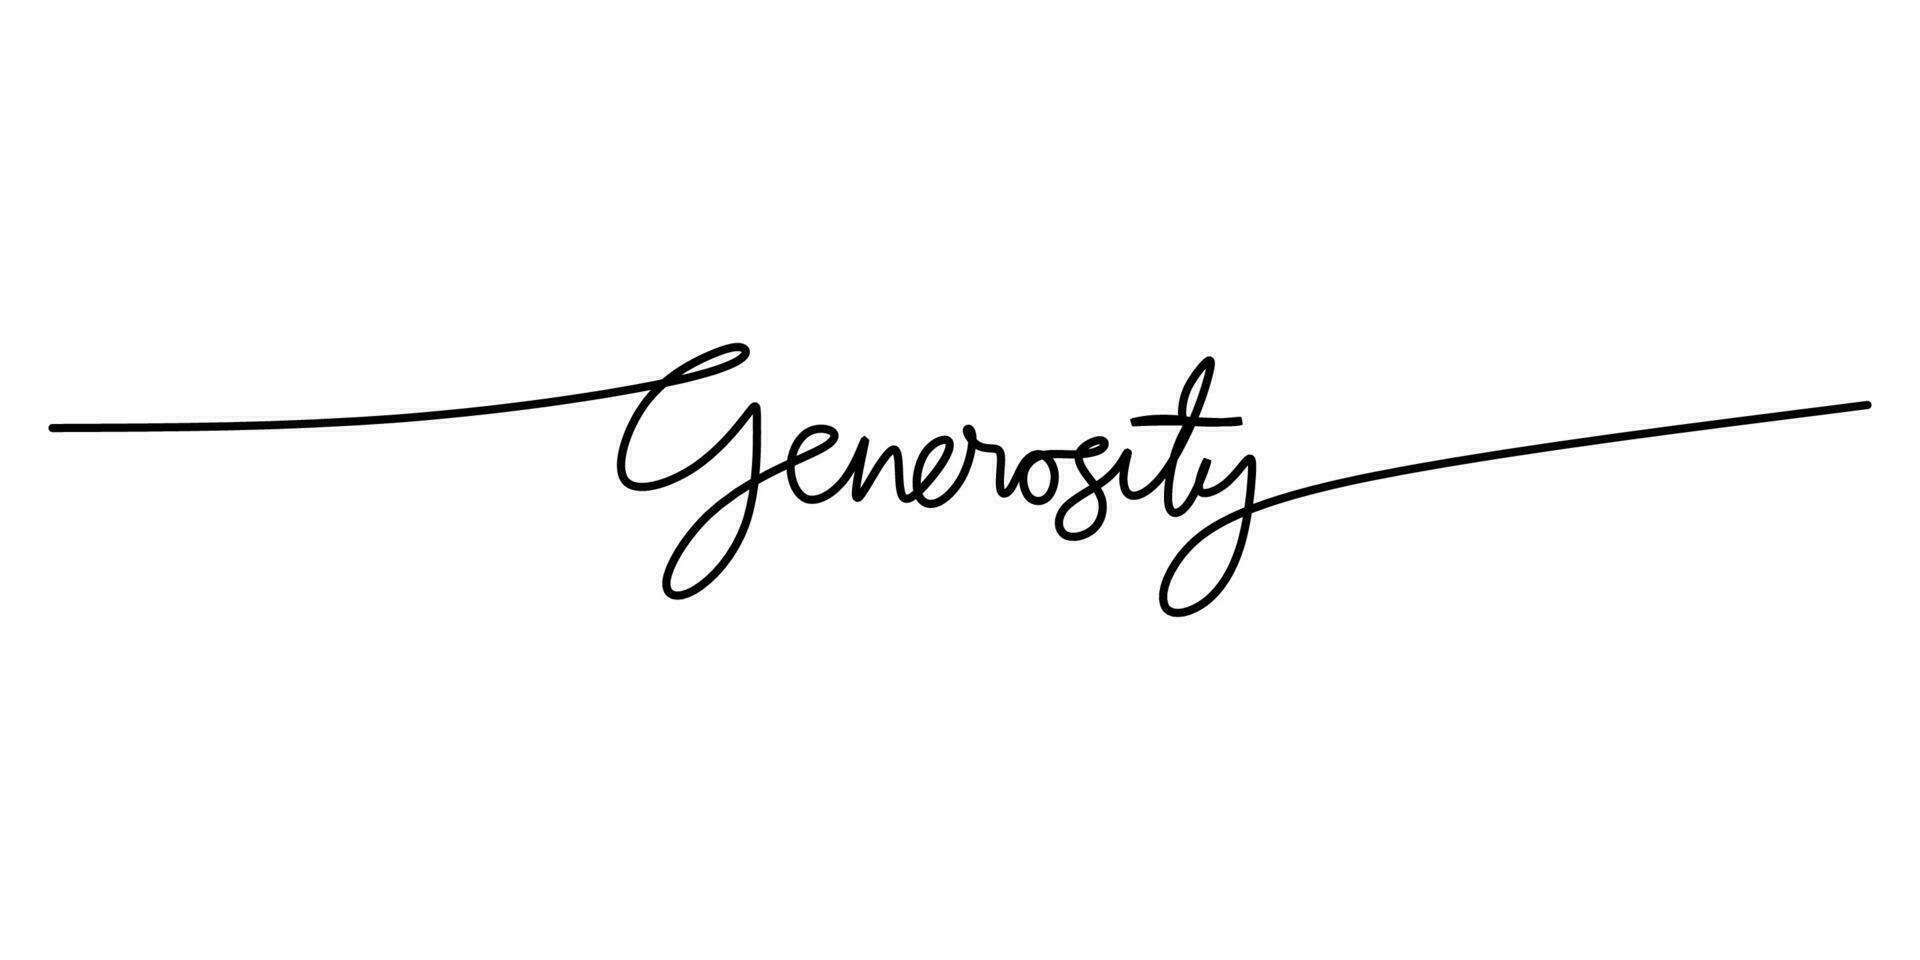 One continuous line drawing typography line art of generosity word vector